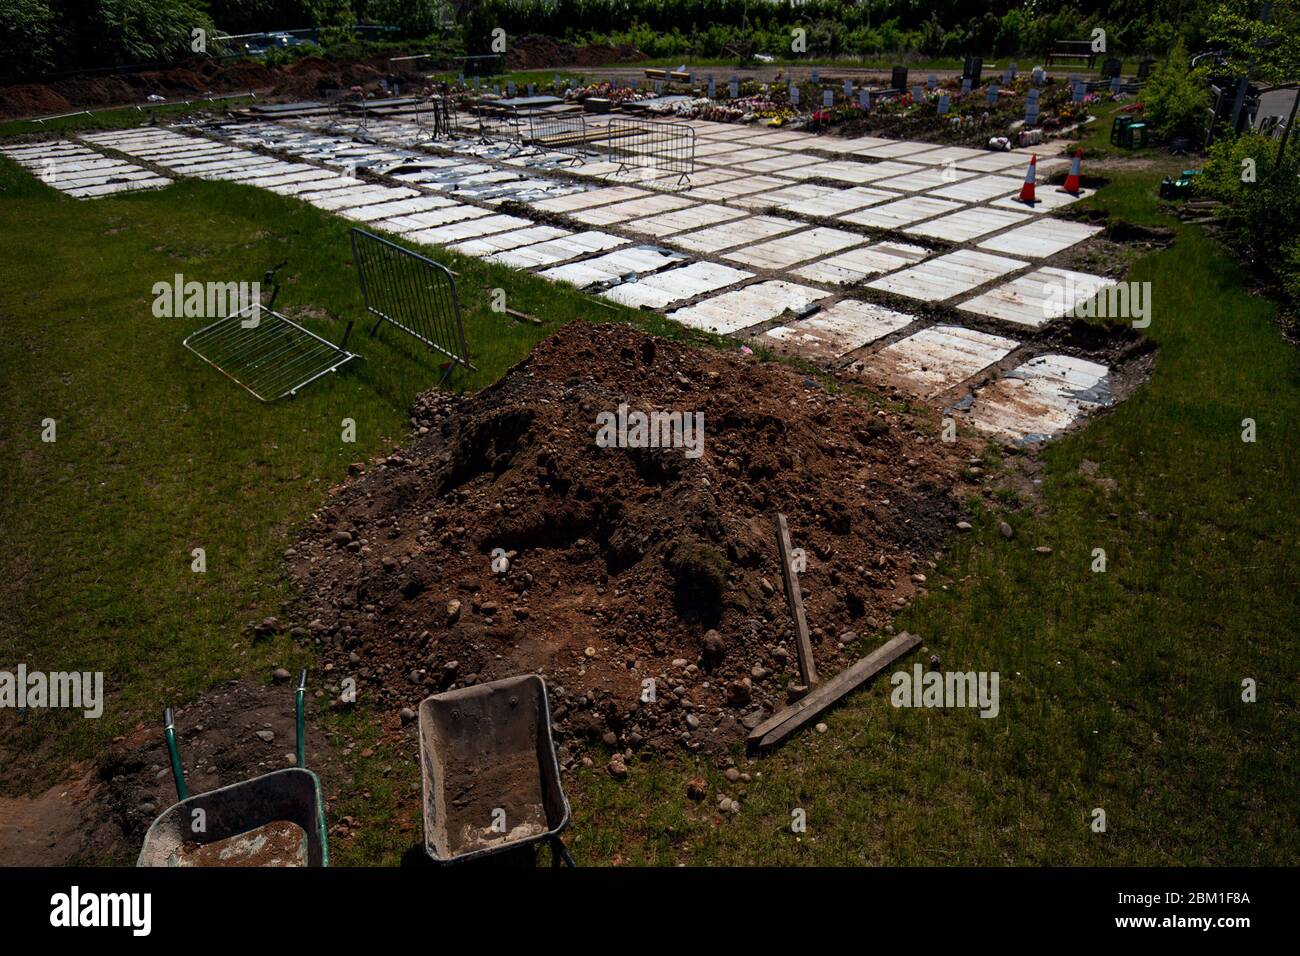 Sutton New Hall Cemetery in Birmingham, which has reduced opening hours for visitors during lockdown and is seeing an increase in the number of graves being dug during the Coronavirus pandemic. Stock Photo